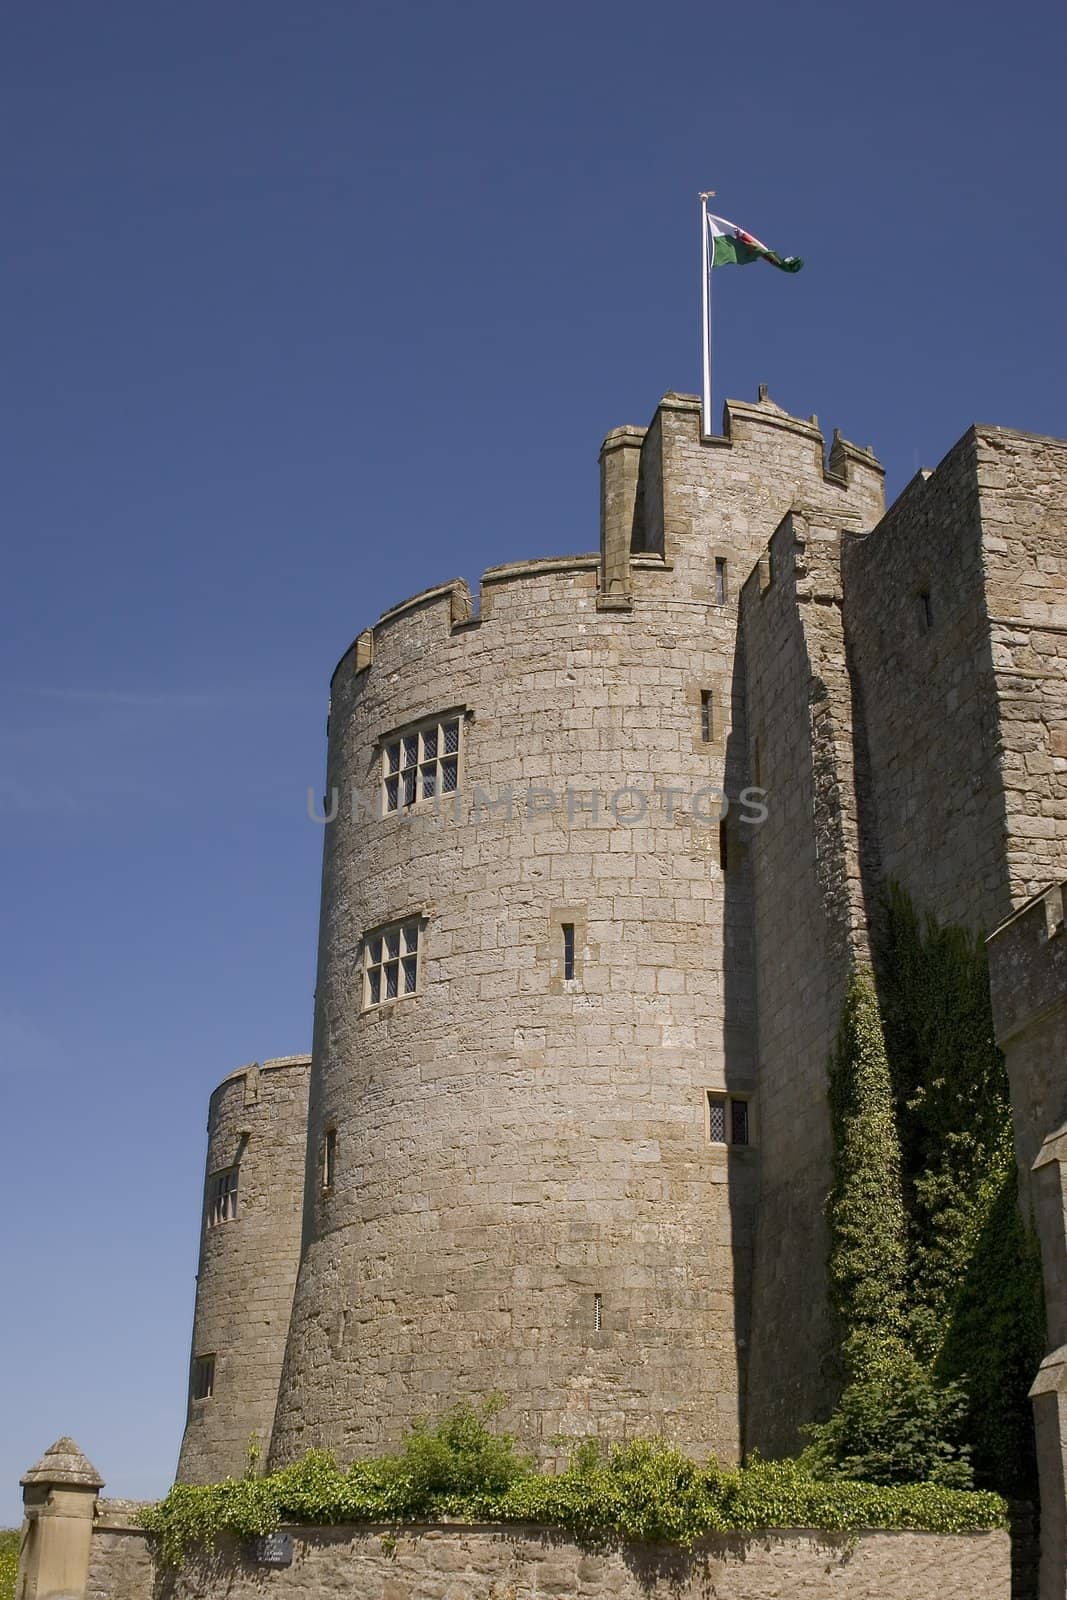 A turret on a castle with a flag flying